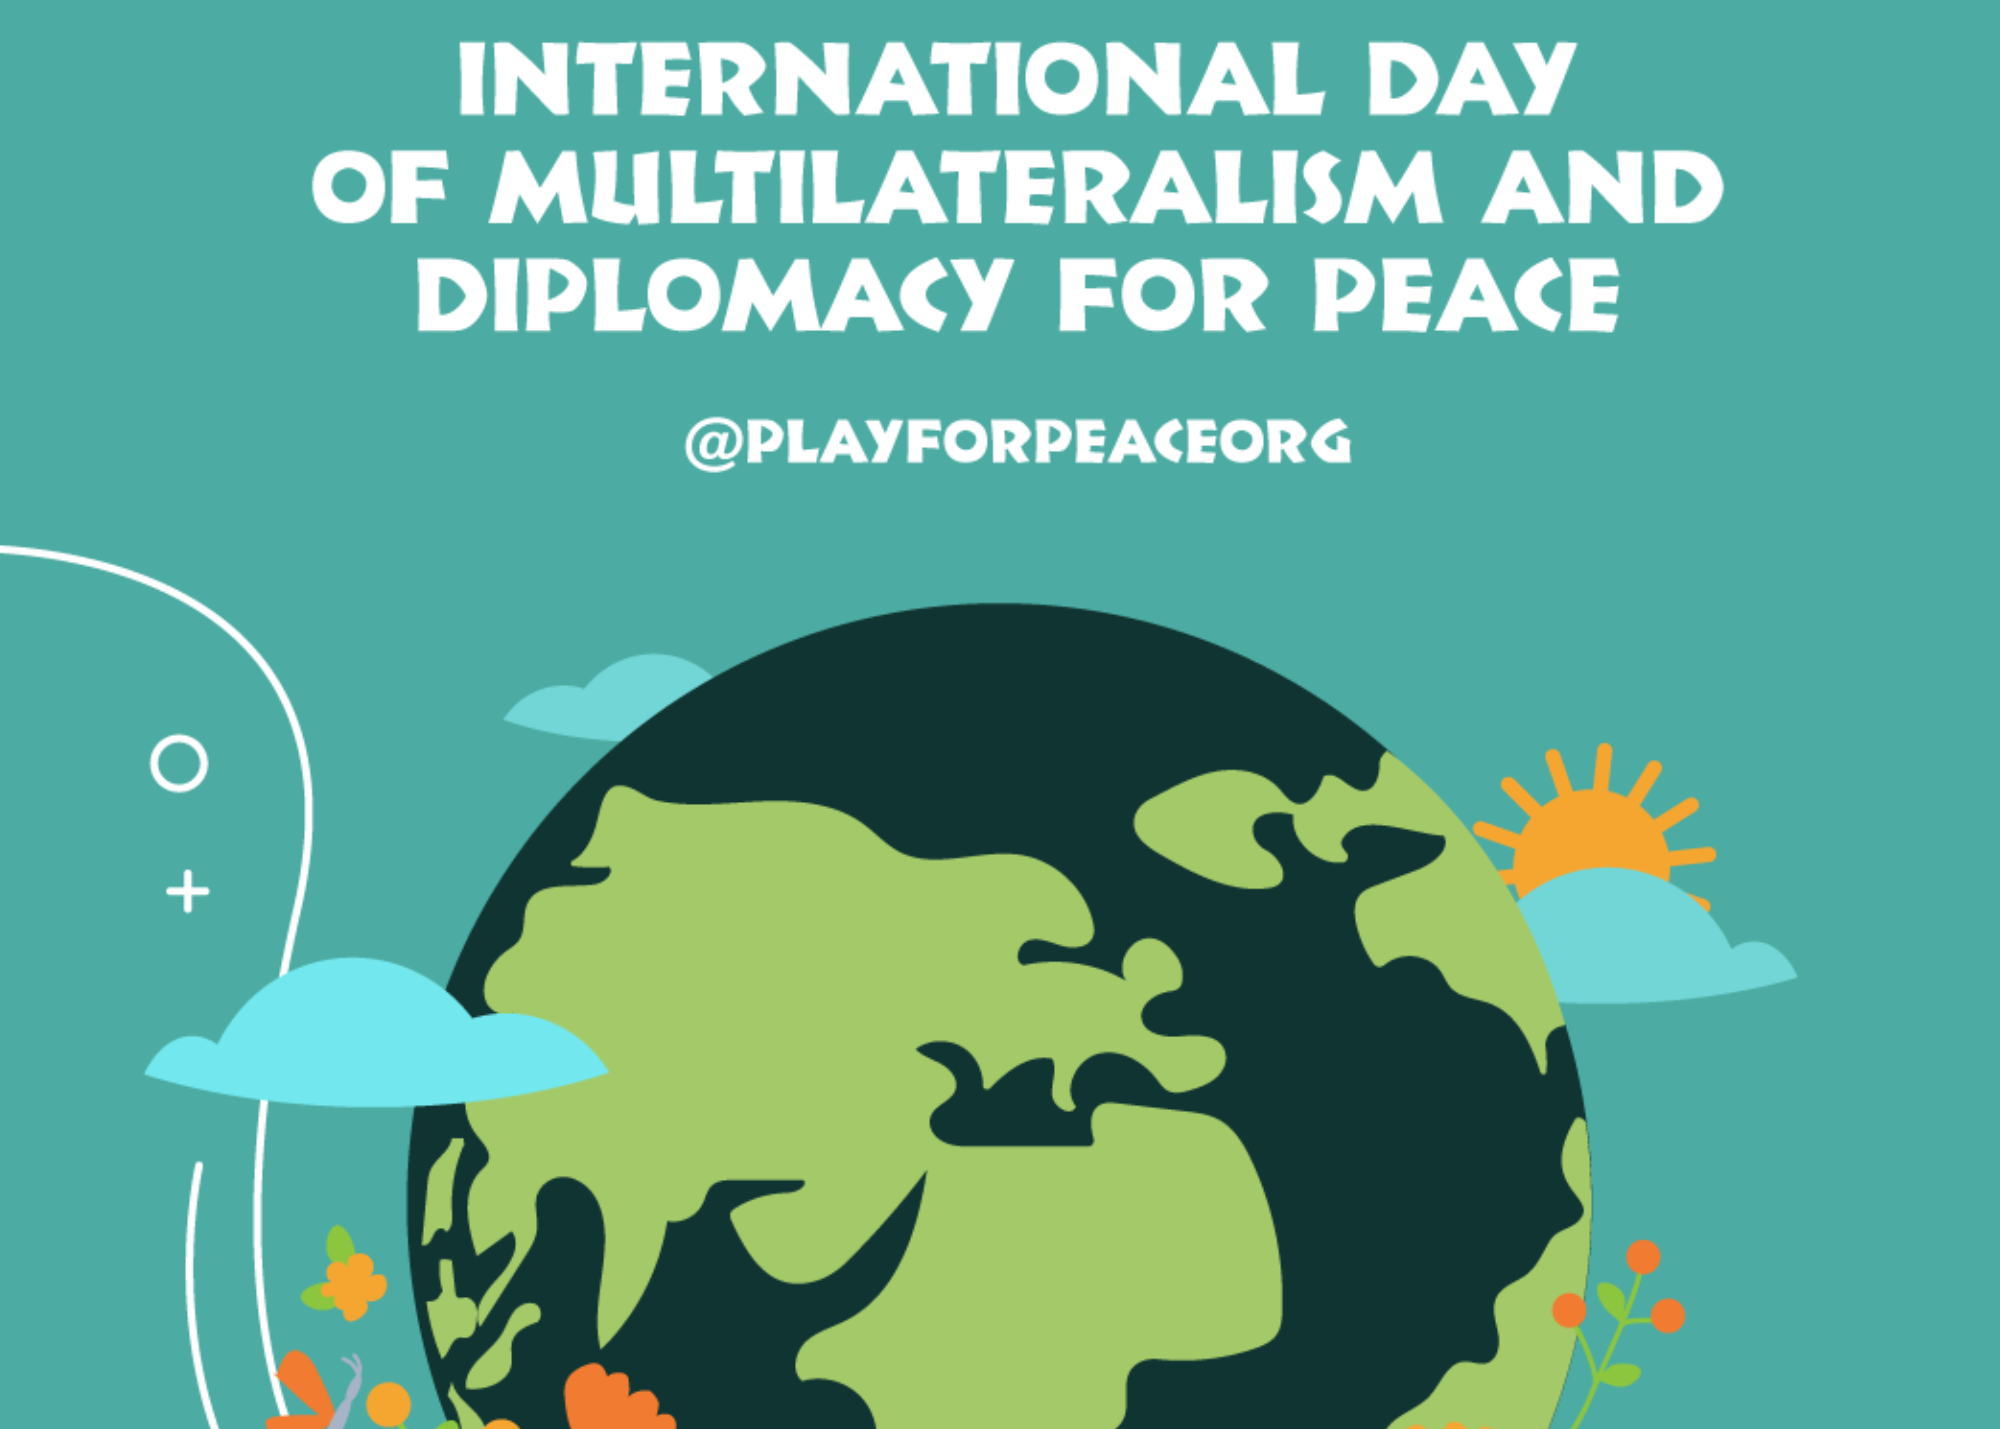 The International Day of Multilateralism and Diplomacy for Peace